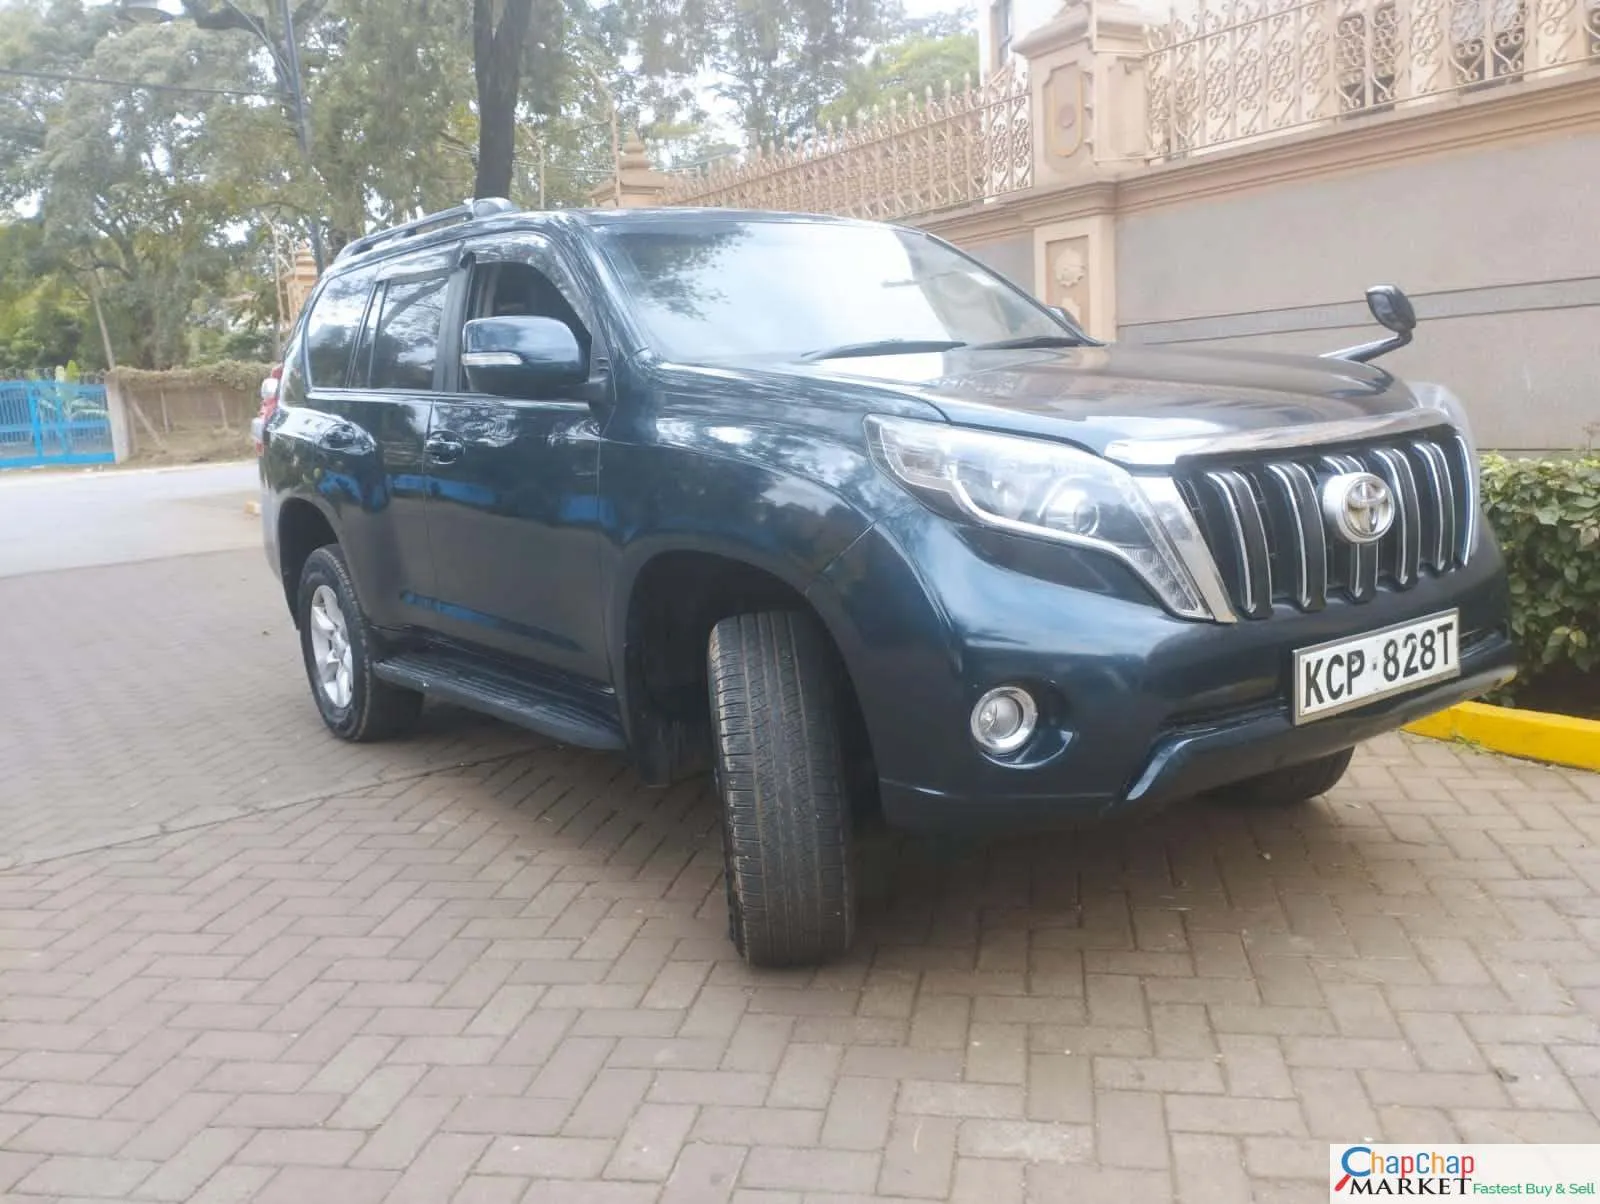 Toyota Prado j150 for sale in Kenya QUICK SALE You Pay 30% Deposit Trade in OK EXCLUSIVE